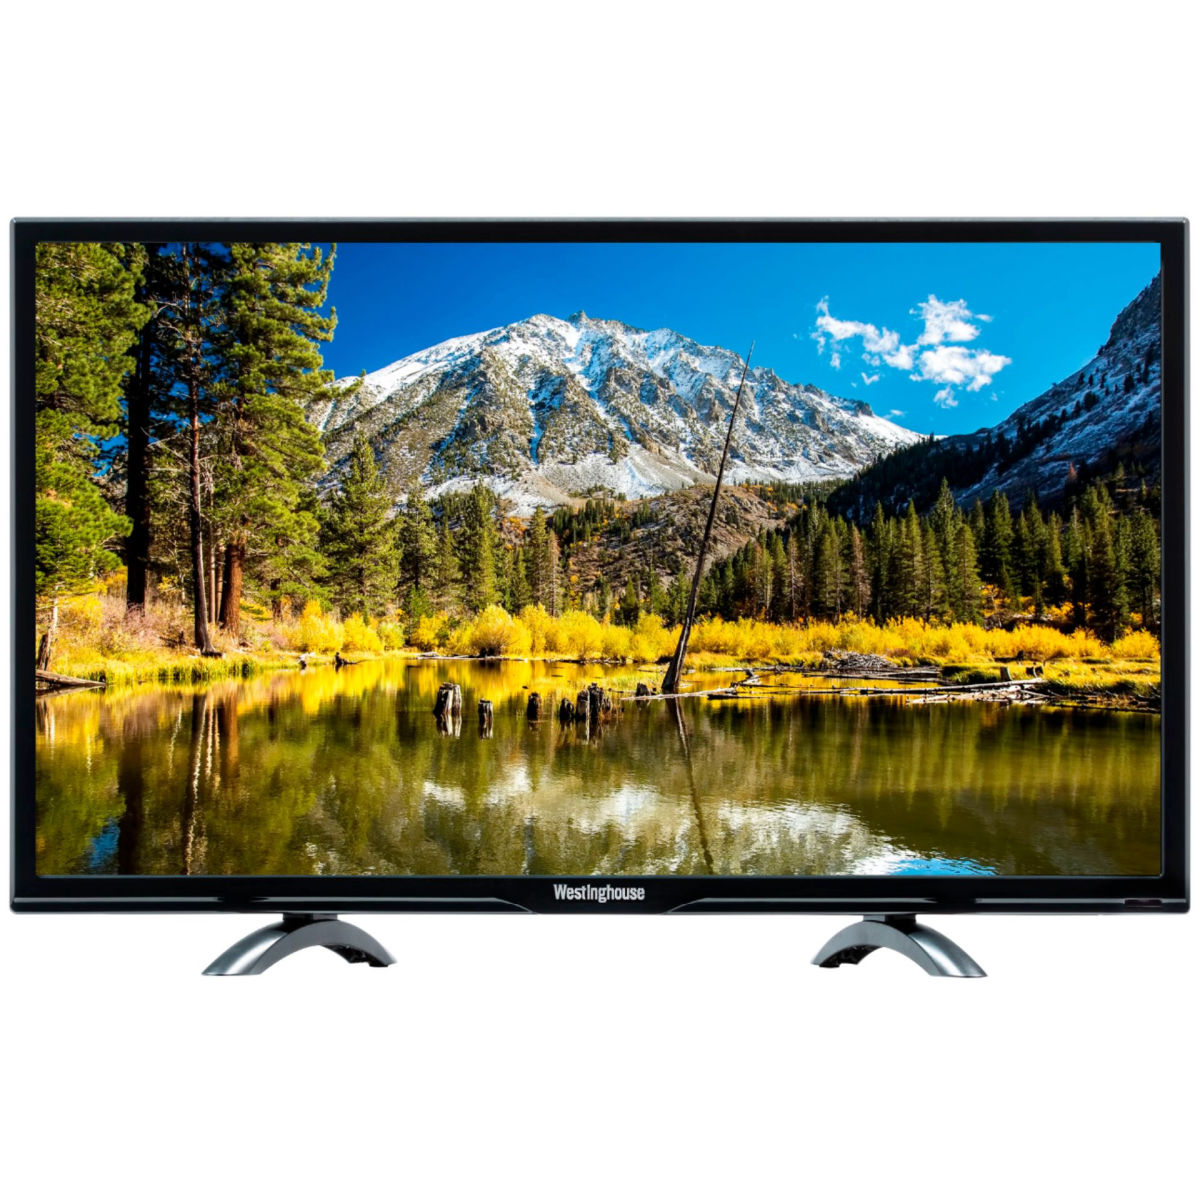 Westinghouse WD24HB6101 24-Inch DVD Combo LED HDTV